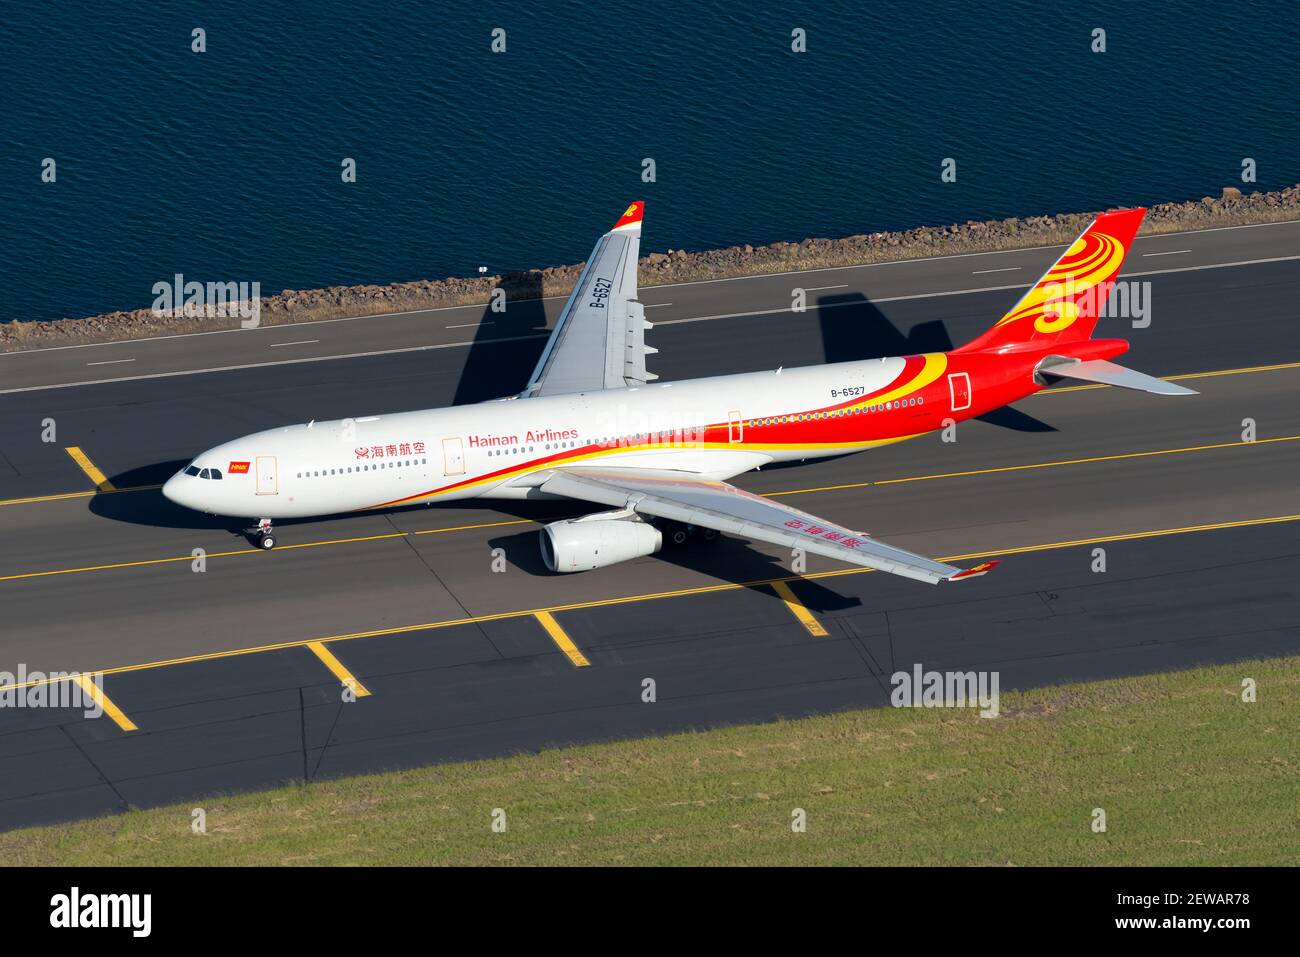 Hainan Airlines Airbus A330 aircraft seen from above at international airport. Aerial view of Airbus A330-300 airplane B-6527 of Hainan Airline. Stock Photo